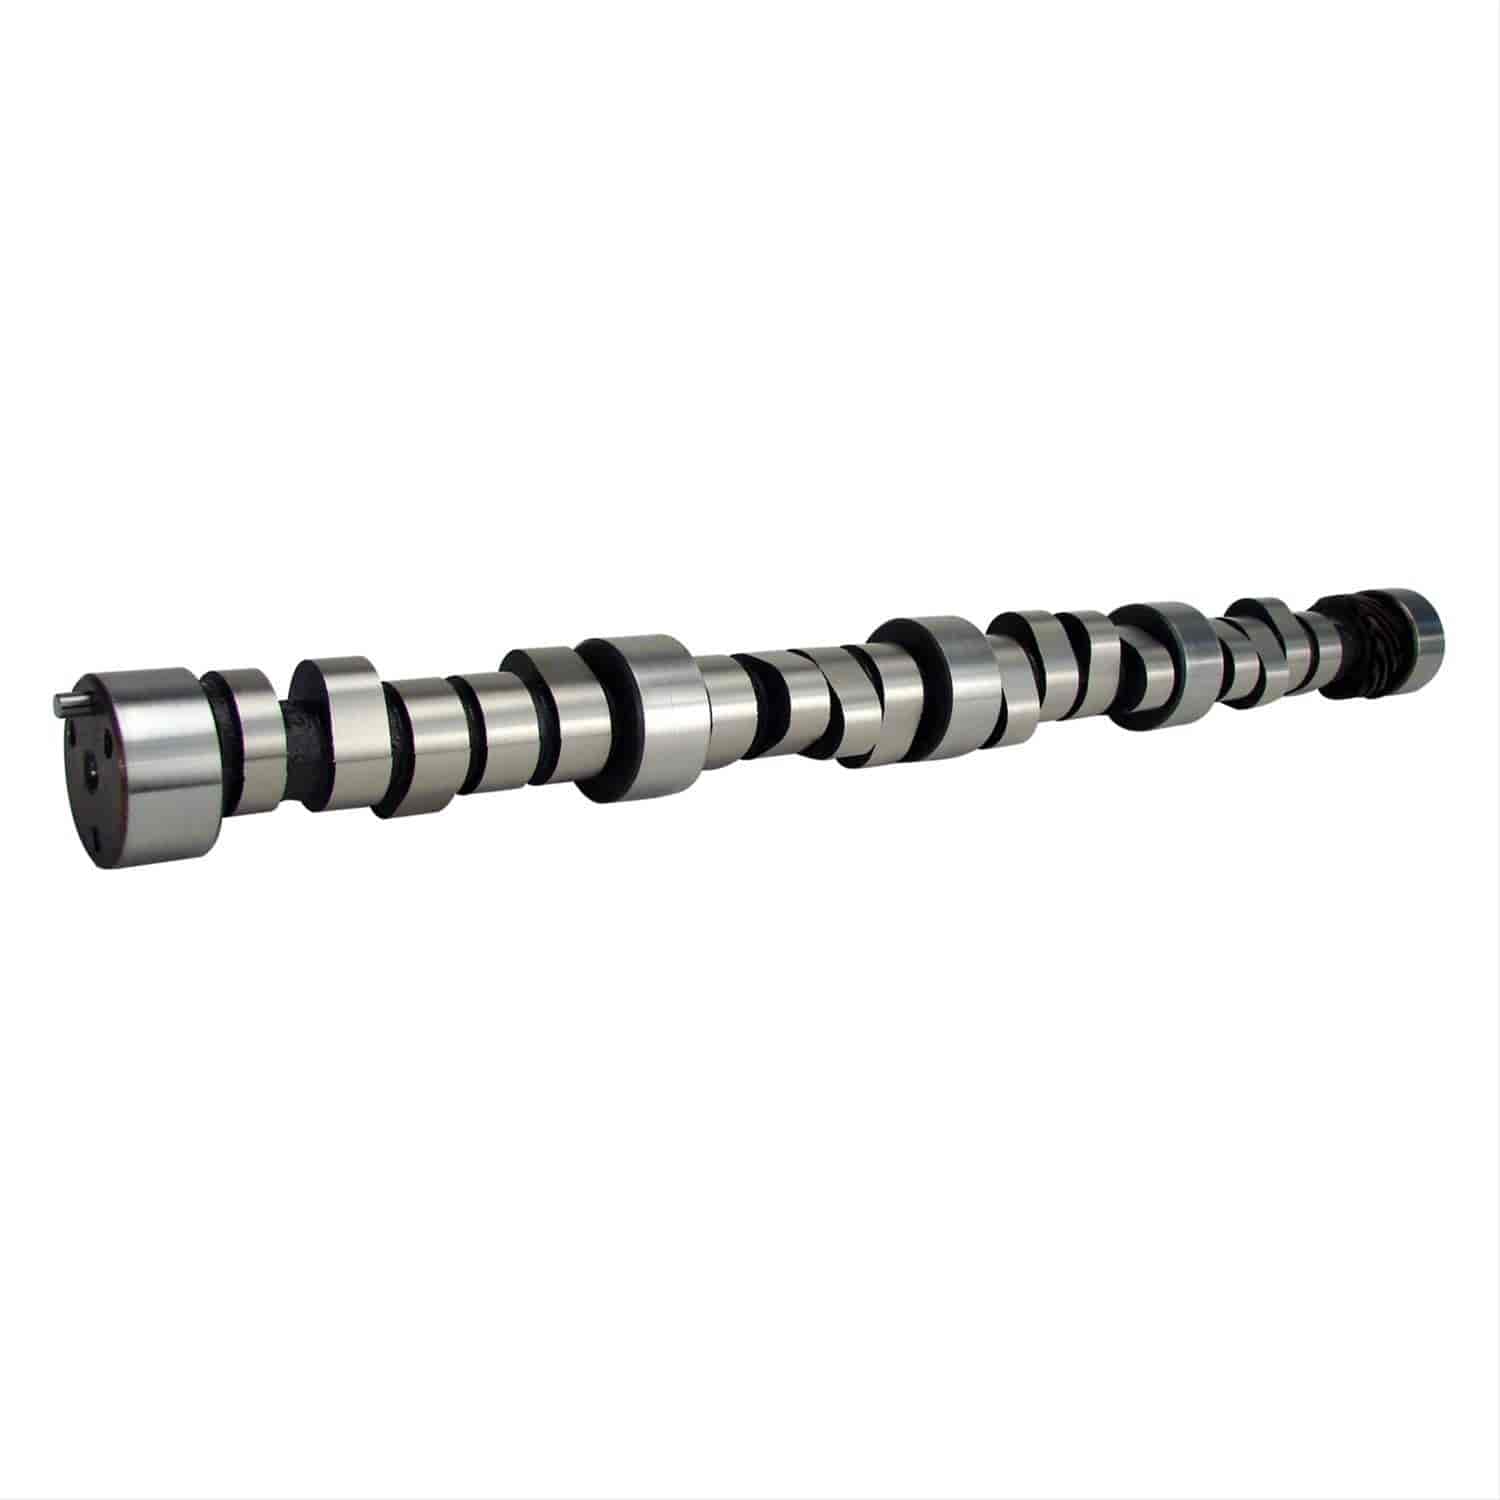 Voodoo Retro-Fit Hydraulic Roller Camshaft for 1965-96 Big